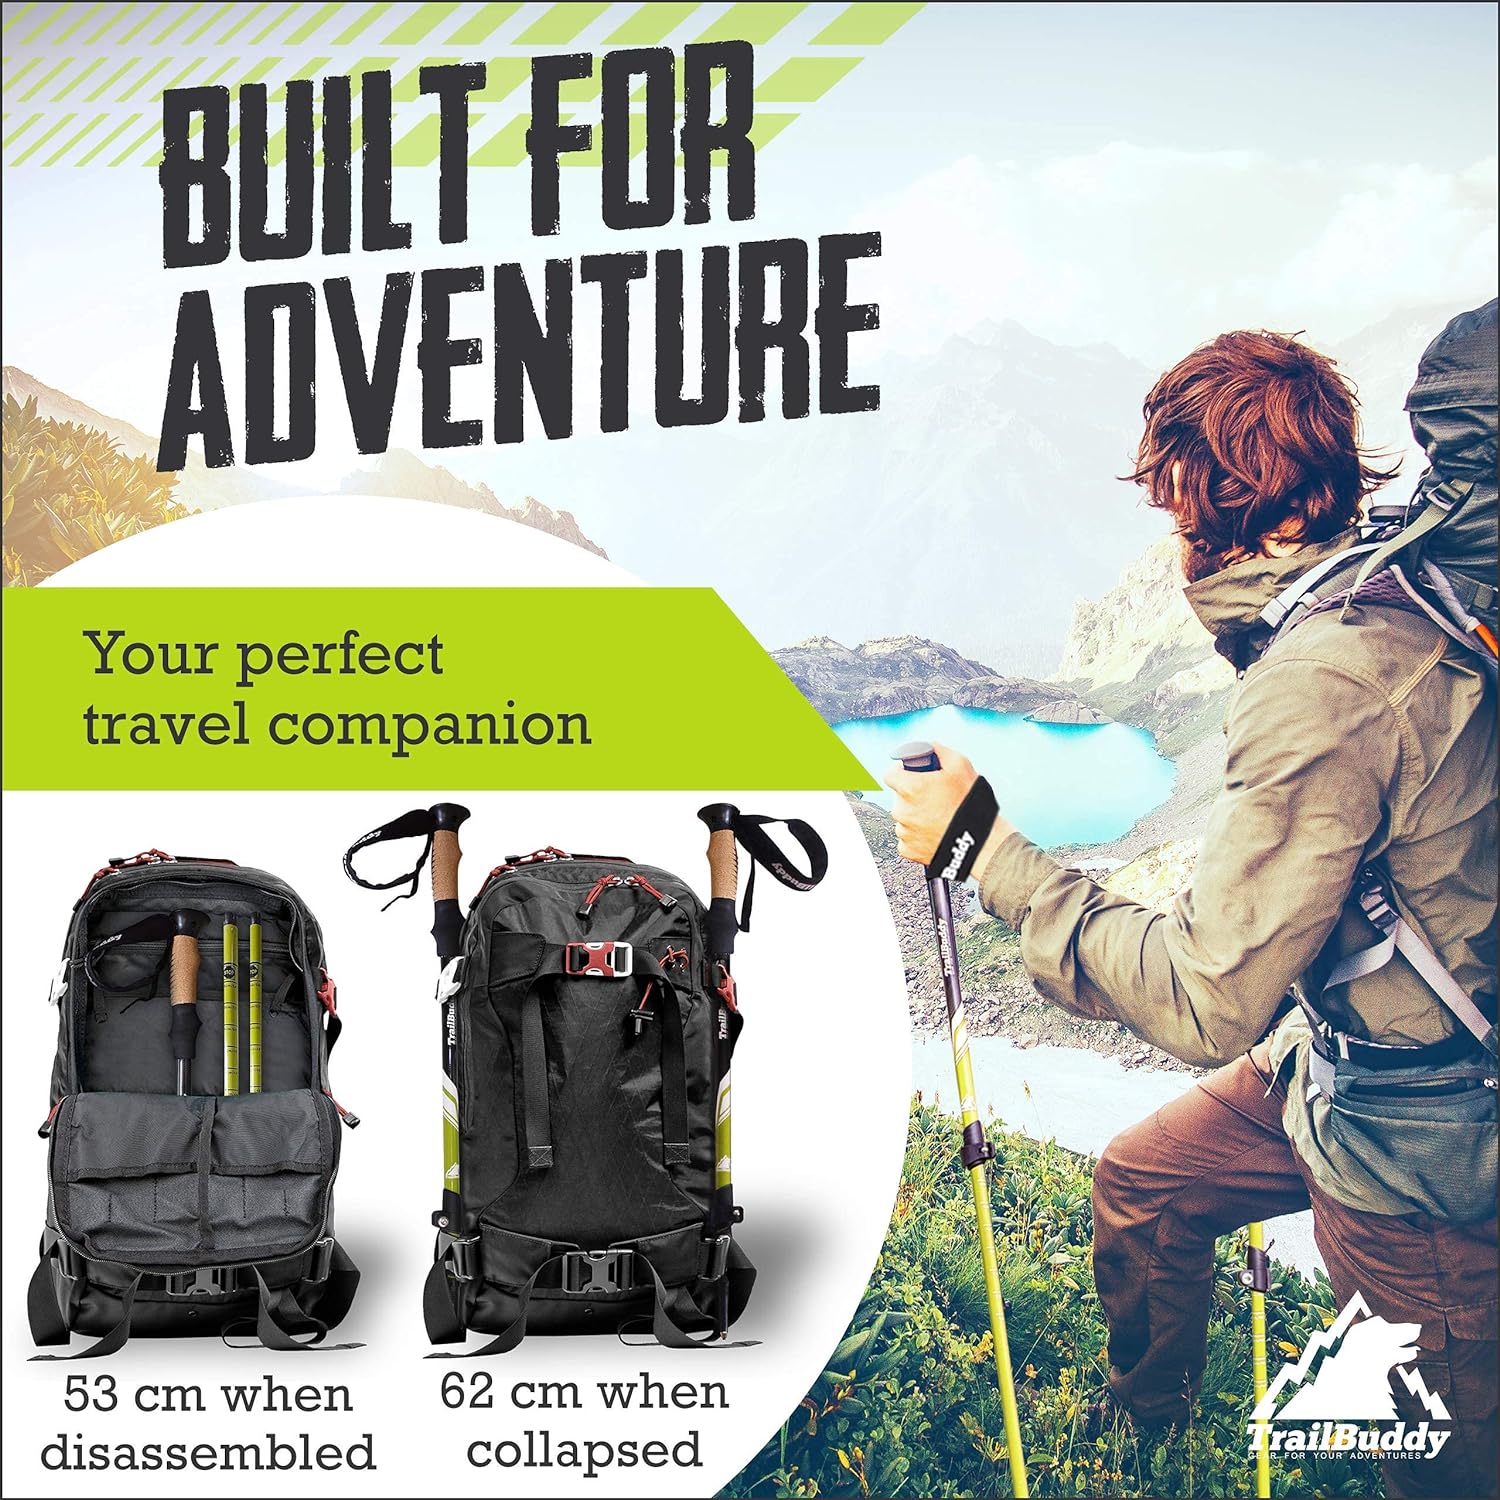 TrailBuddy Trekking Poles - The Perfect Companion for Your Hiking Adventures